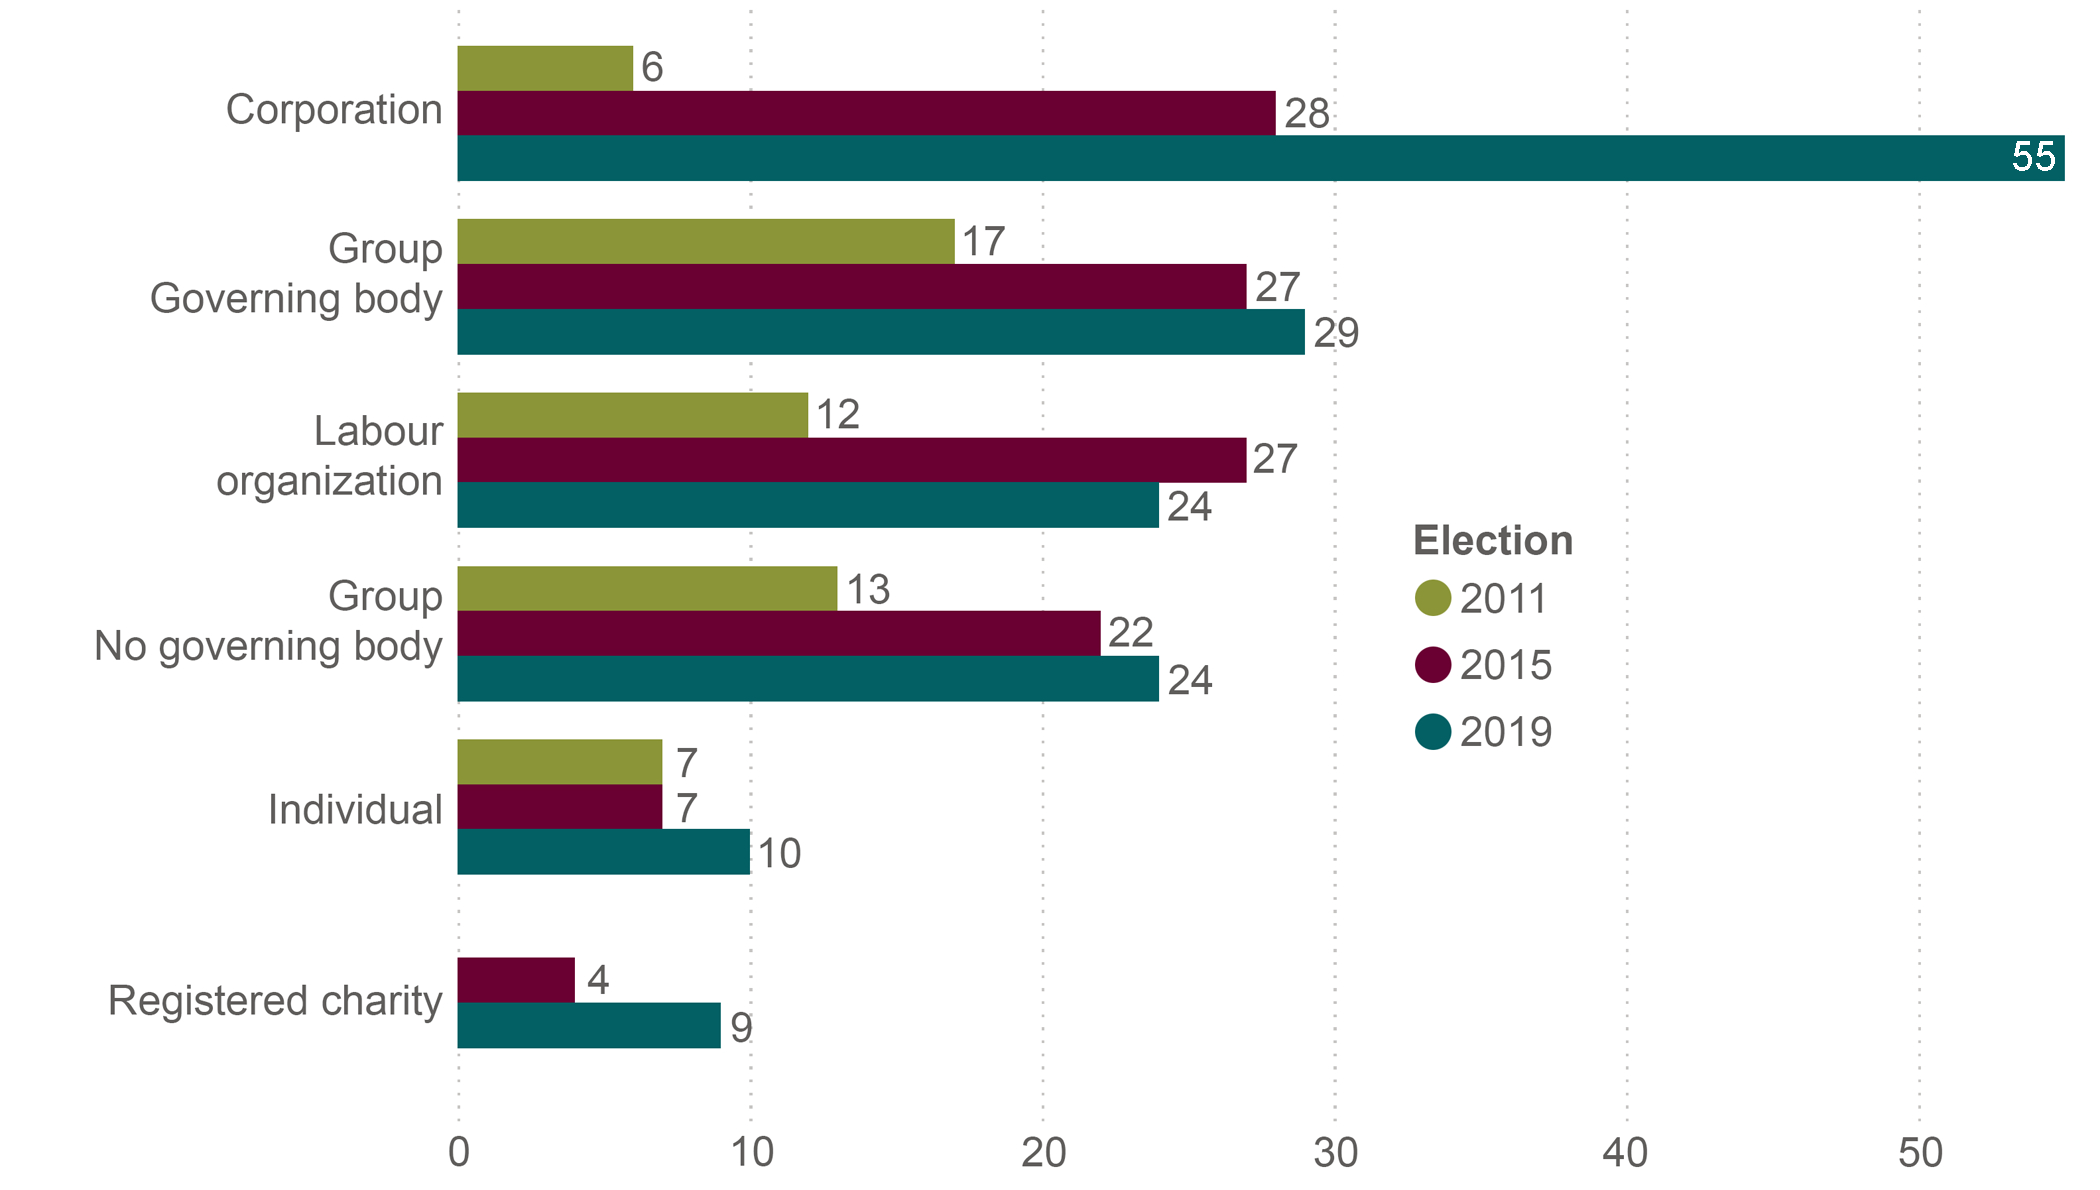 Figure 1 – Number of third parties by type at the 2011, 2015 and 2019 general elections